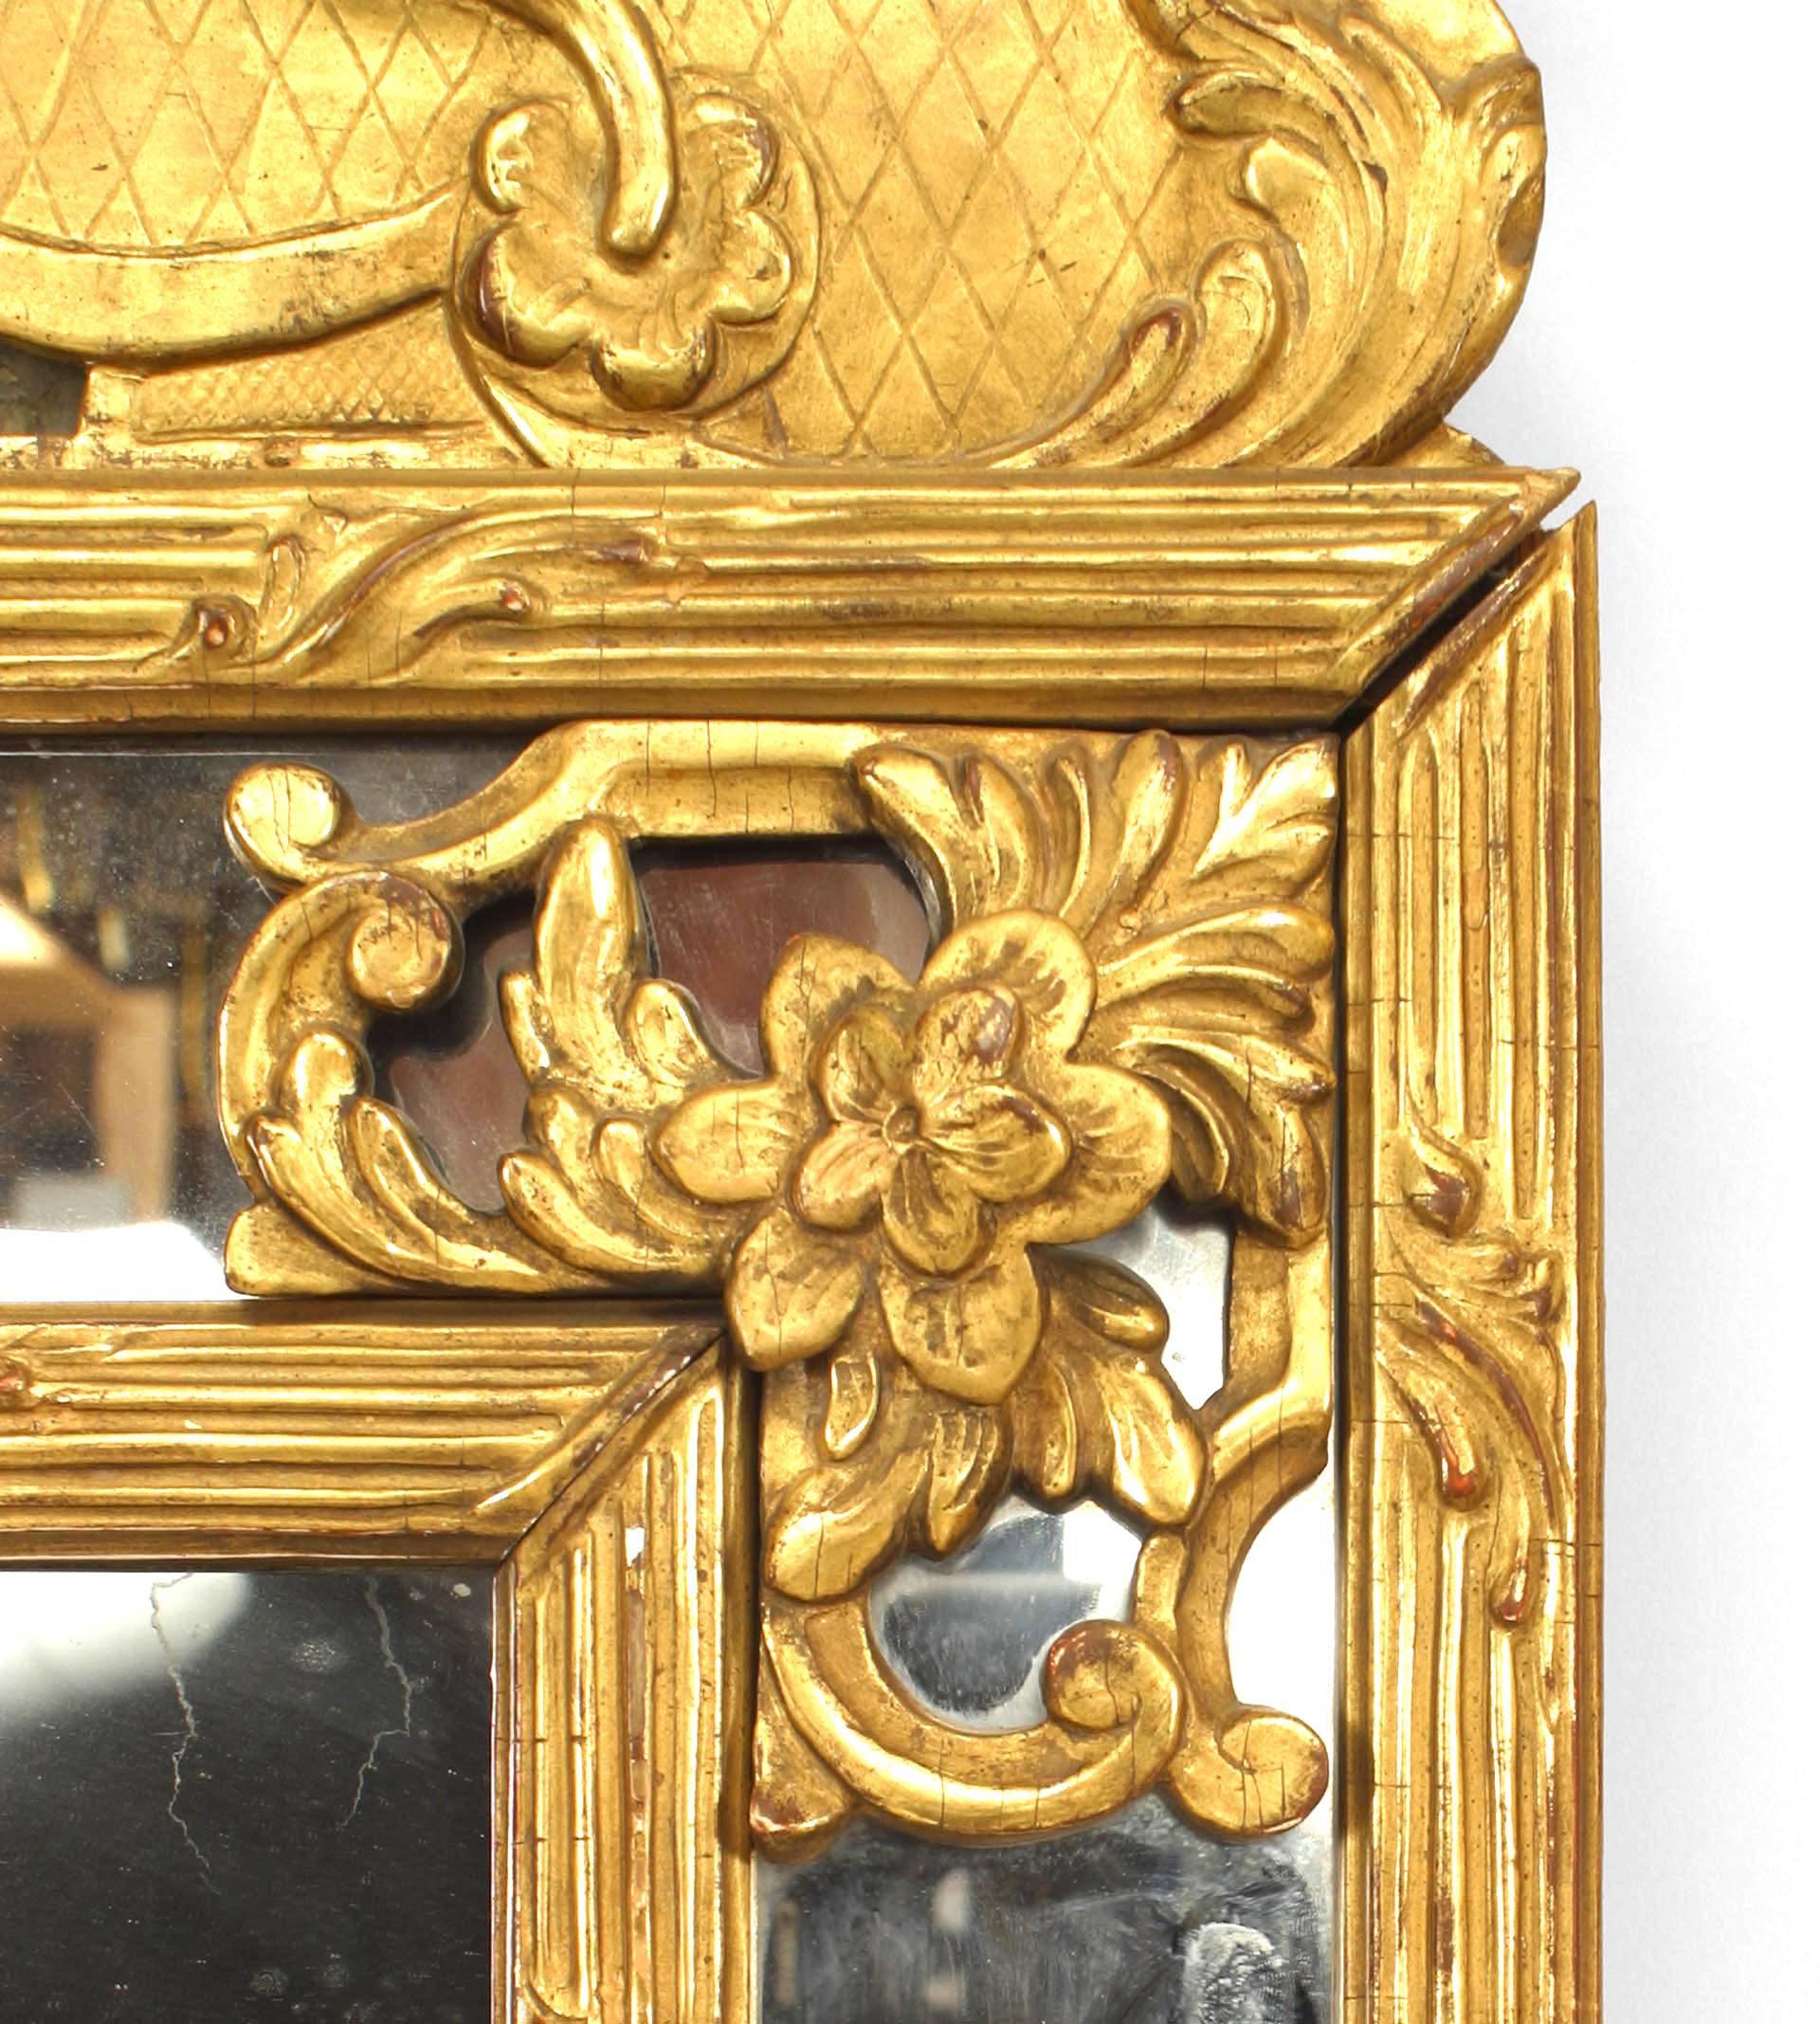 French Louis XVI-style (19th Century) rectangular giltwood wall mirror with a mirrored border and an added (18th Century) pediment top with a carved shell form relief.
